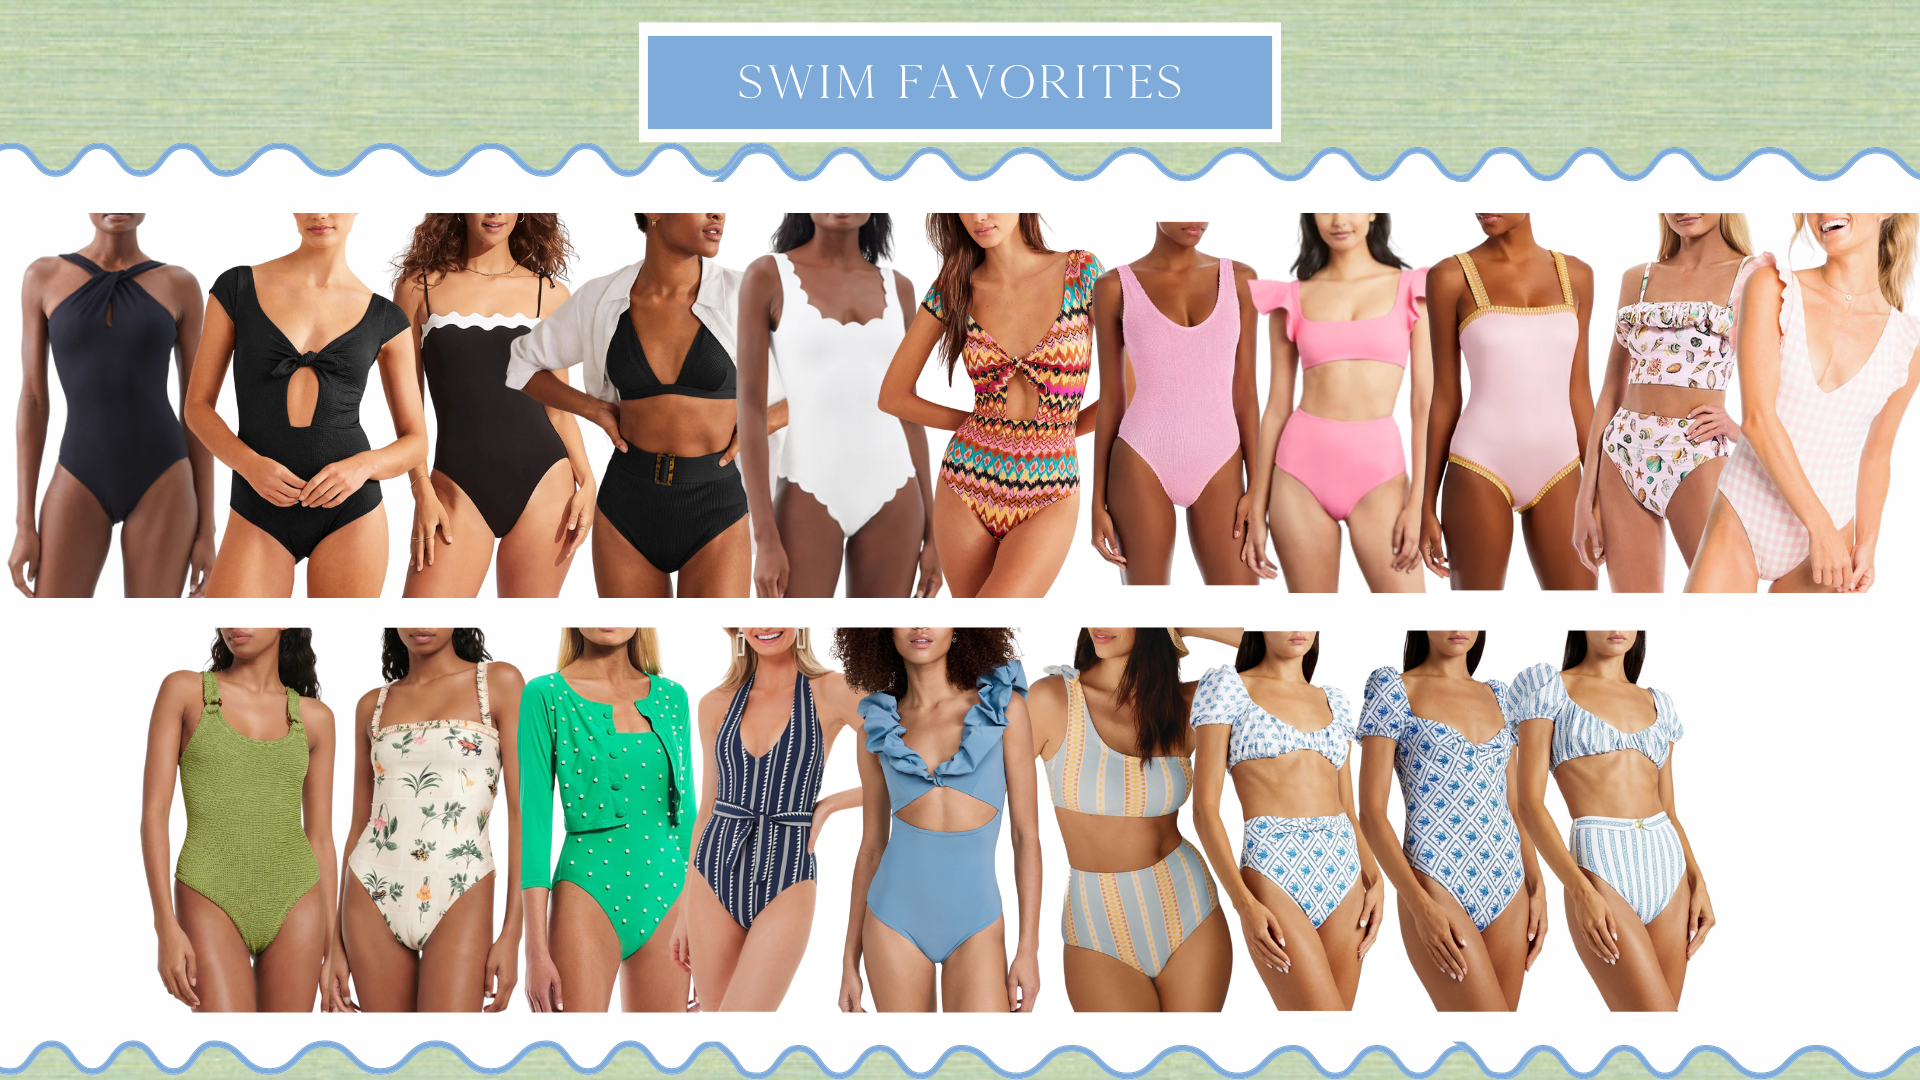 Best Swimsuits for Moms: 30 Flattering Bathing Suits - Sarah Tucker